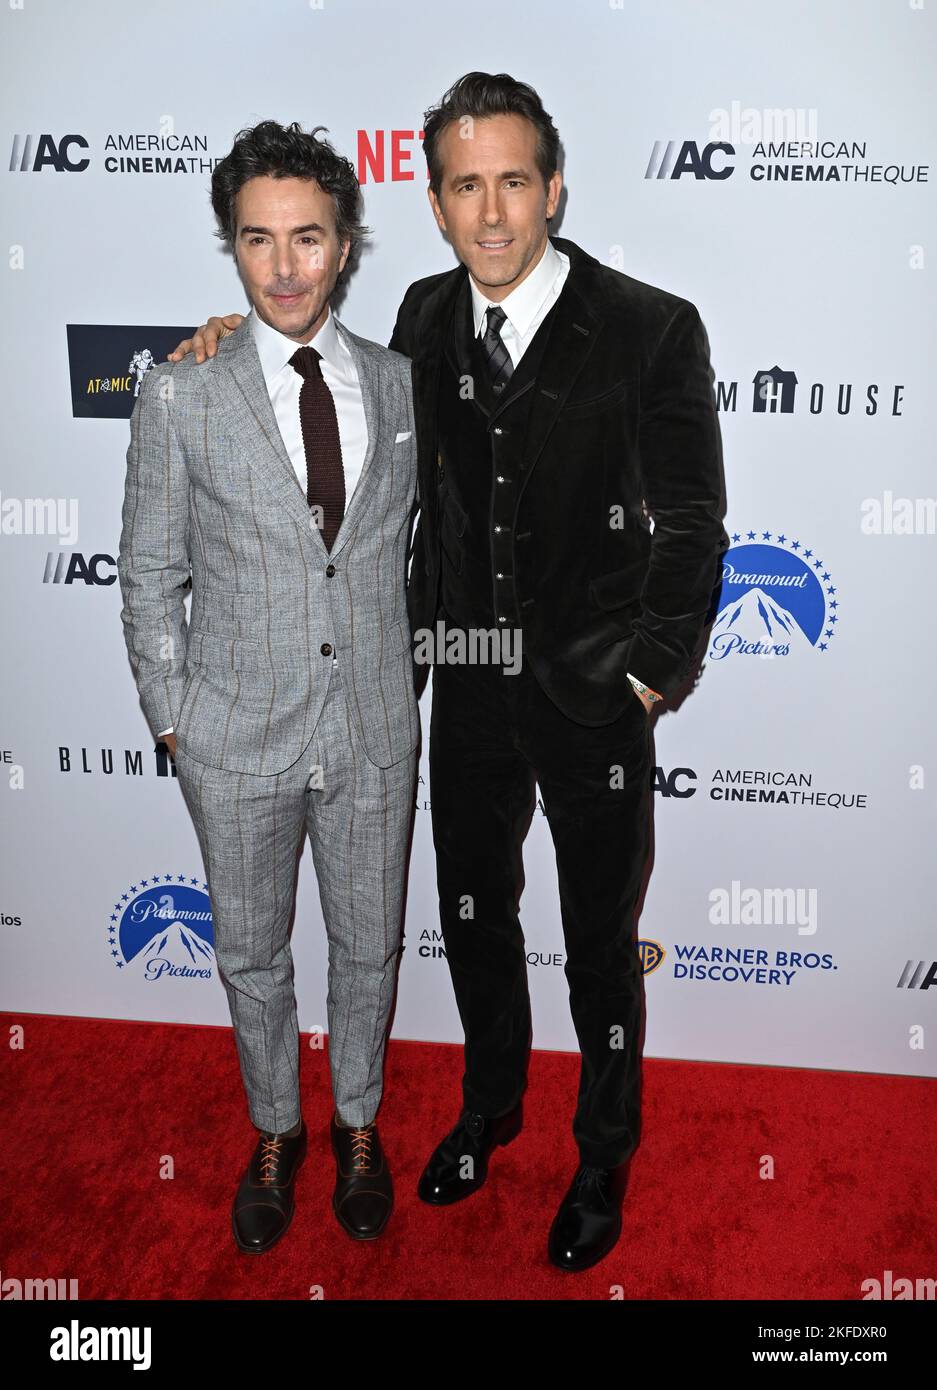 Los Angeles, USA. 17th Nov, 2022. Shawn Levy & Ryan. Reynolds at the 36th Annual American Cinematheque Awards at the Beverly Hilton Hotel. Picture Credit: Paul Smith/Alamy Live News Stock Photo